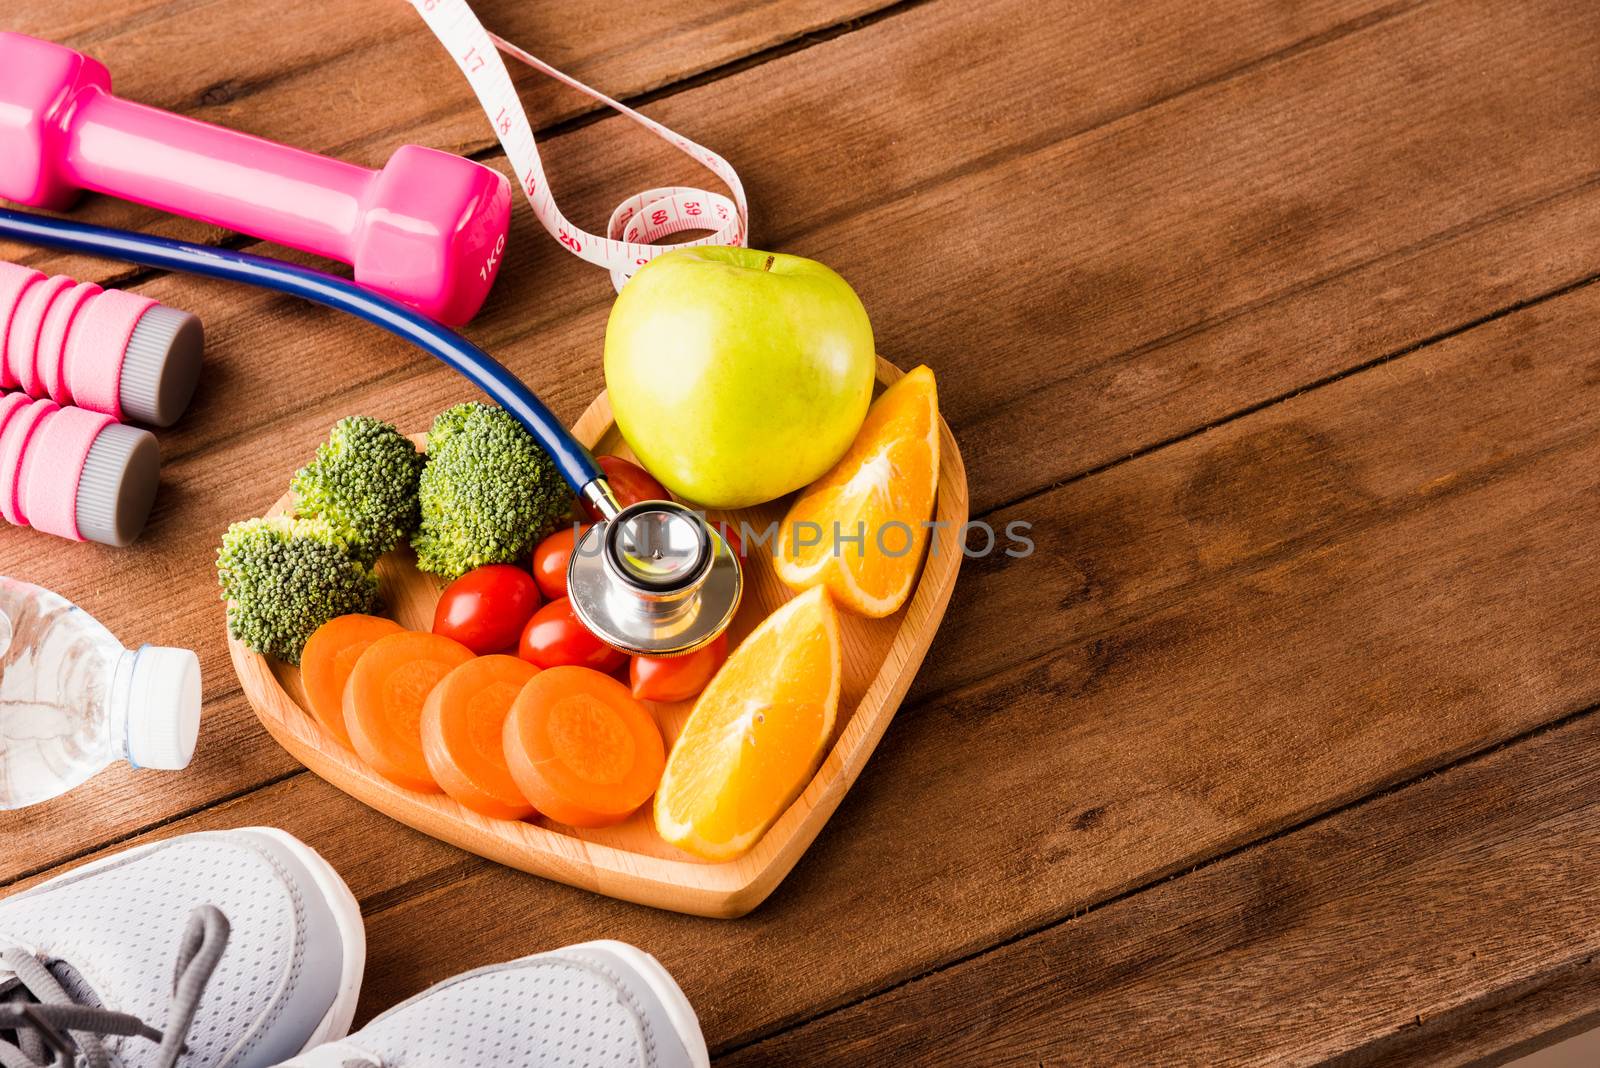 Top view of fresh fruits and vegetables in heart plate wood (apple, carrot, tomato, orange, broccoli) and sports equipment and doctor stethoscope on wooden table, Healthy lifestyle diet food concept